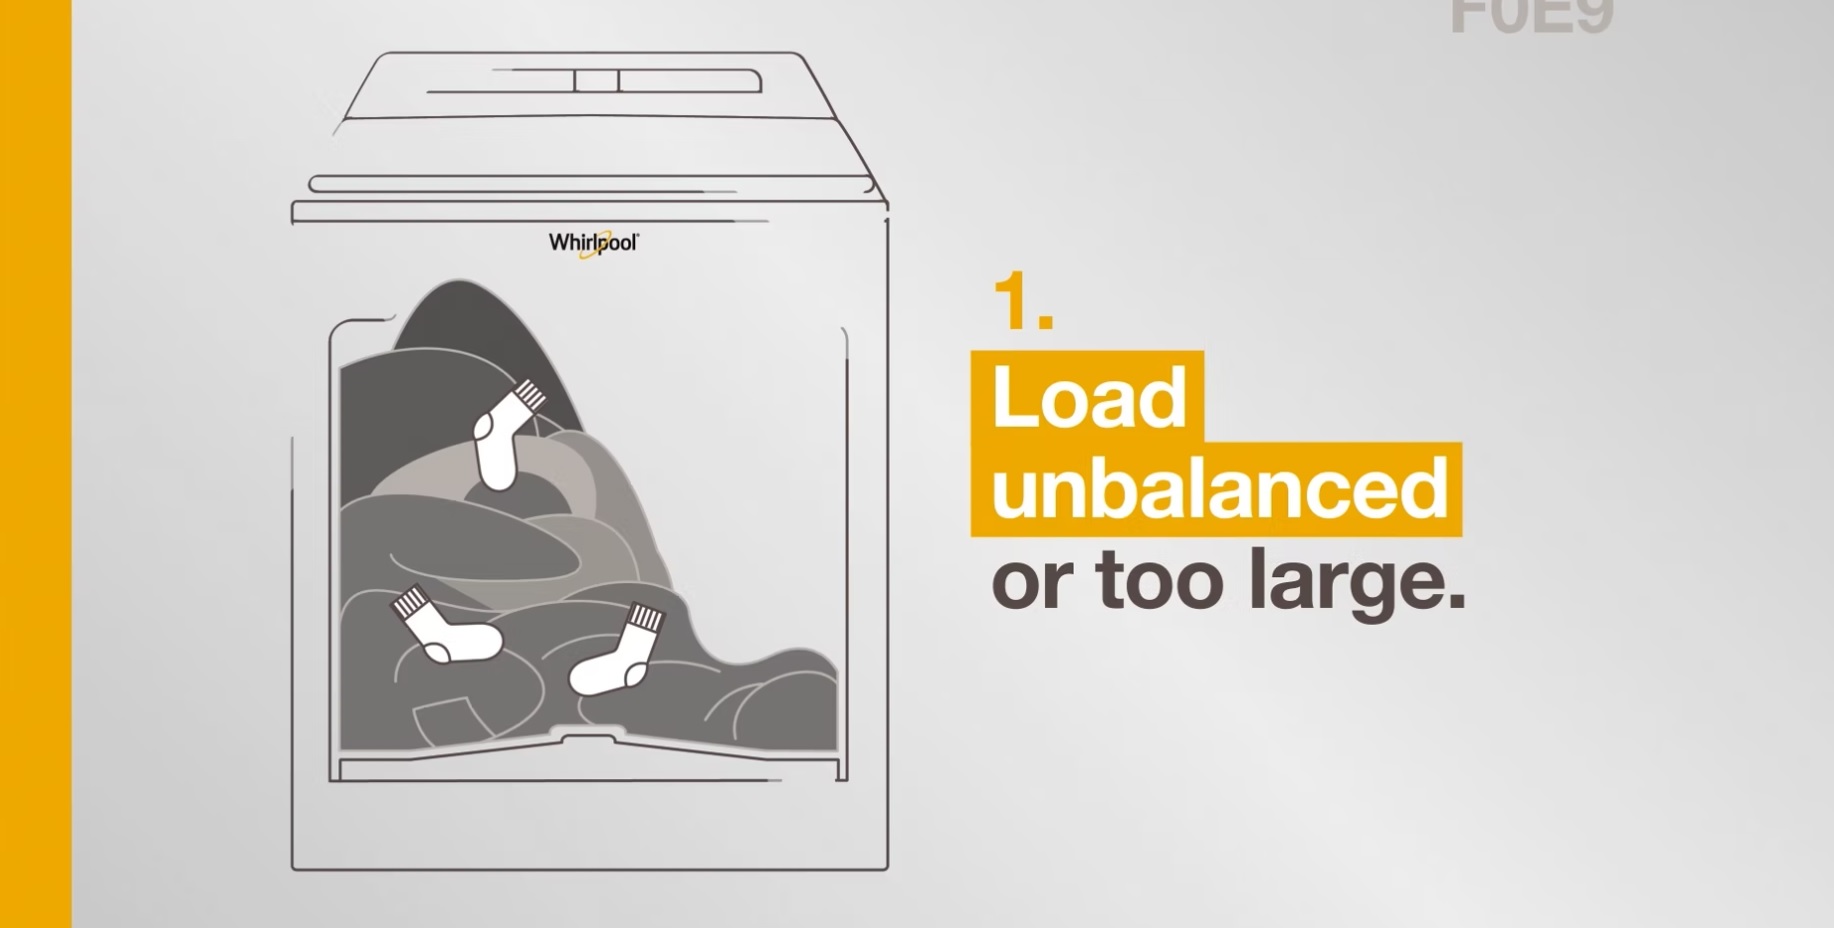 Follow these simple steps to resolve Error Code F0E9 on your Whirlpool Brand® washer. This video will assist you if you are experiencing and unbalanced load. If you need further assistance call for service at 1-866-333-4591.